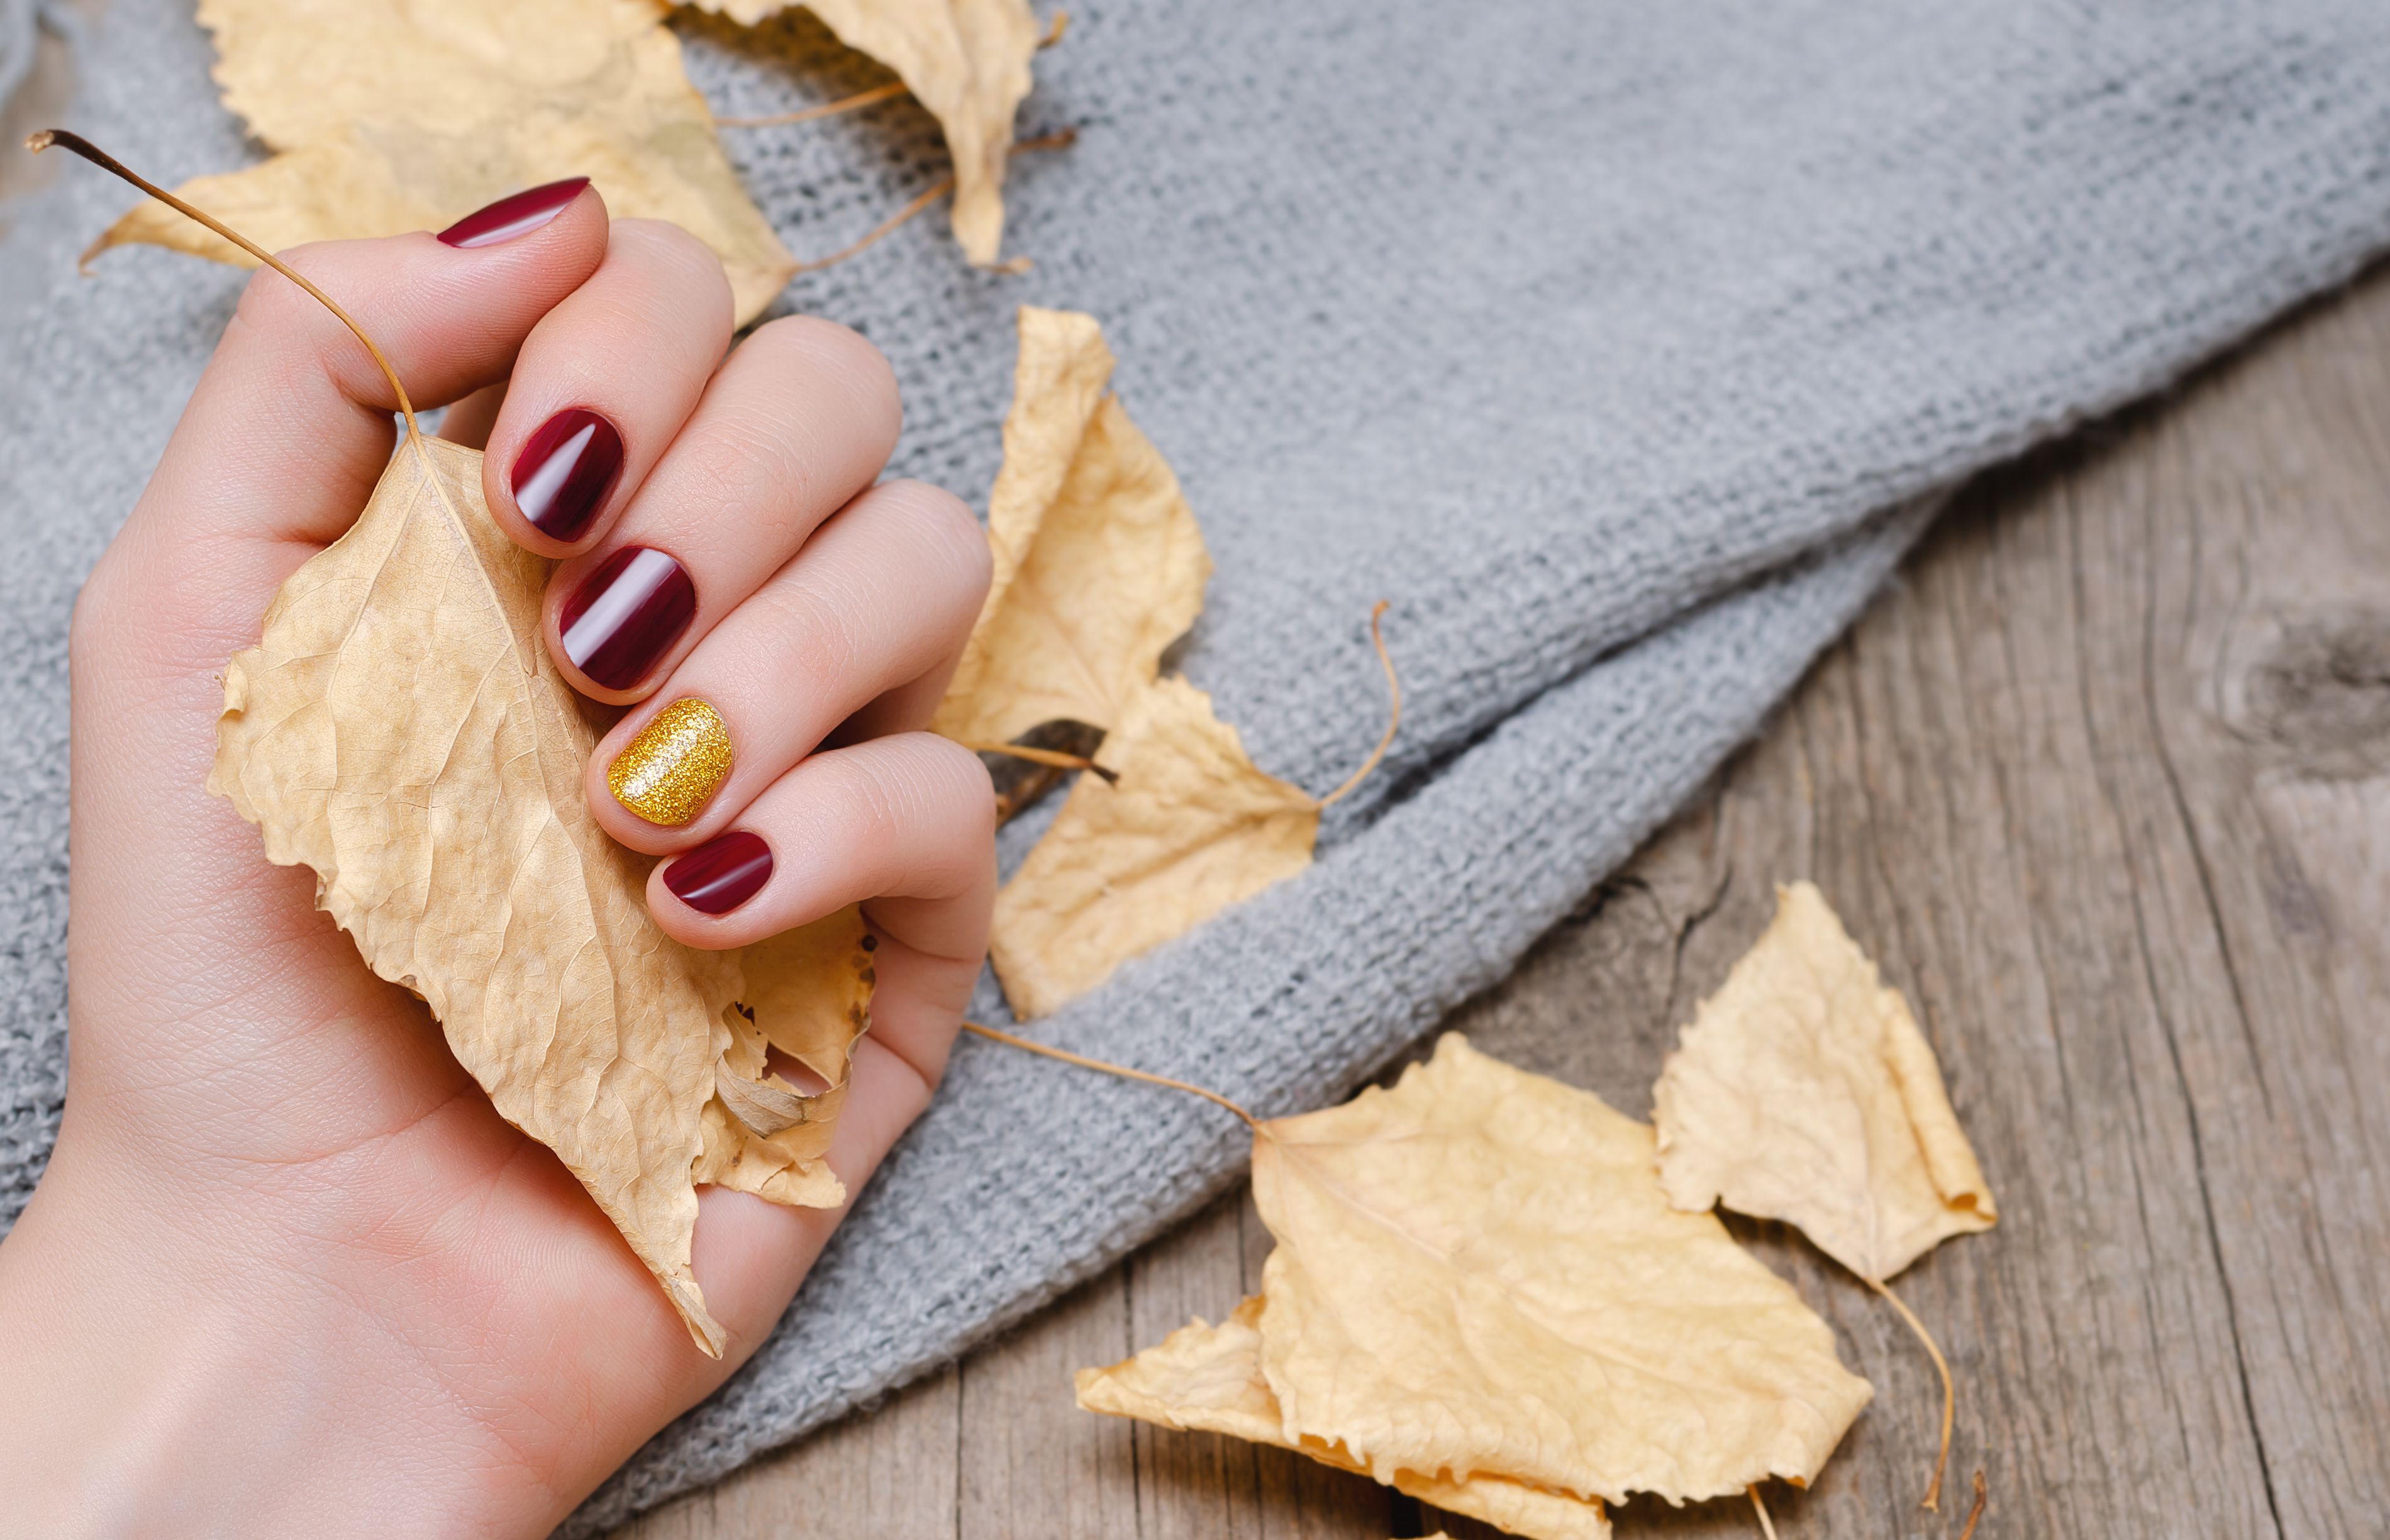 9. 30+ Fall Nail Designs to Try This Season - wide 4